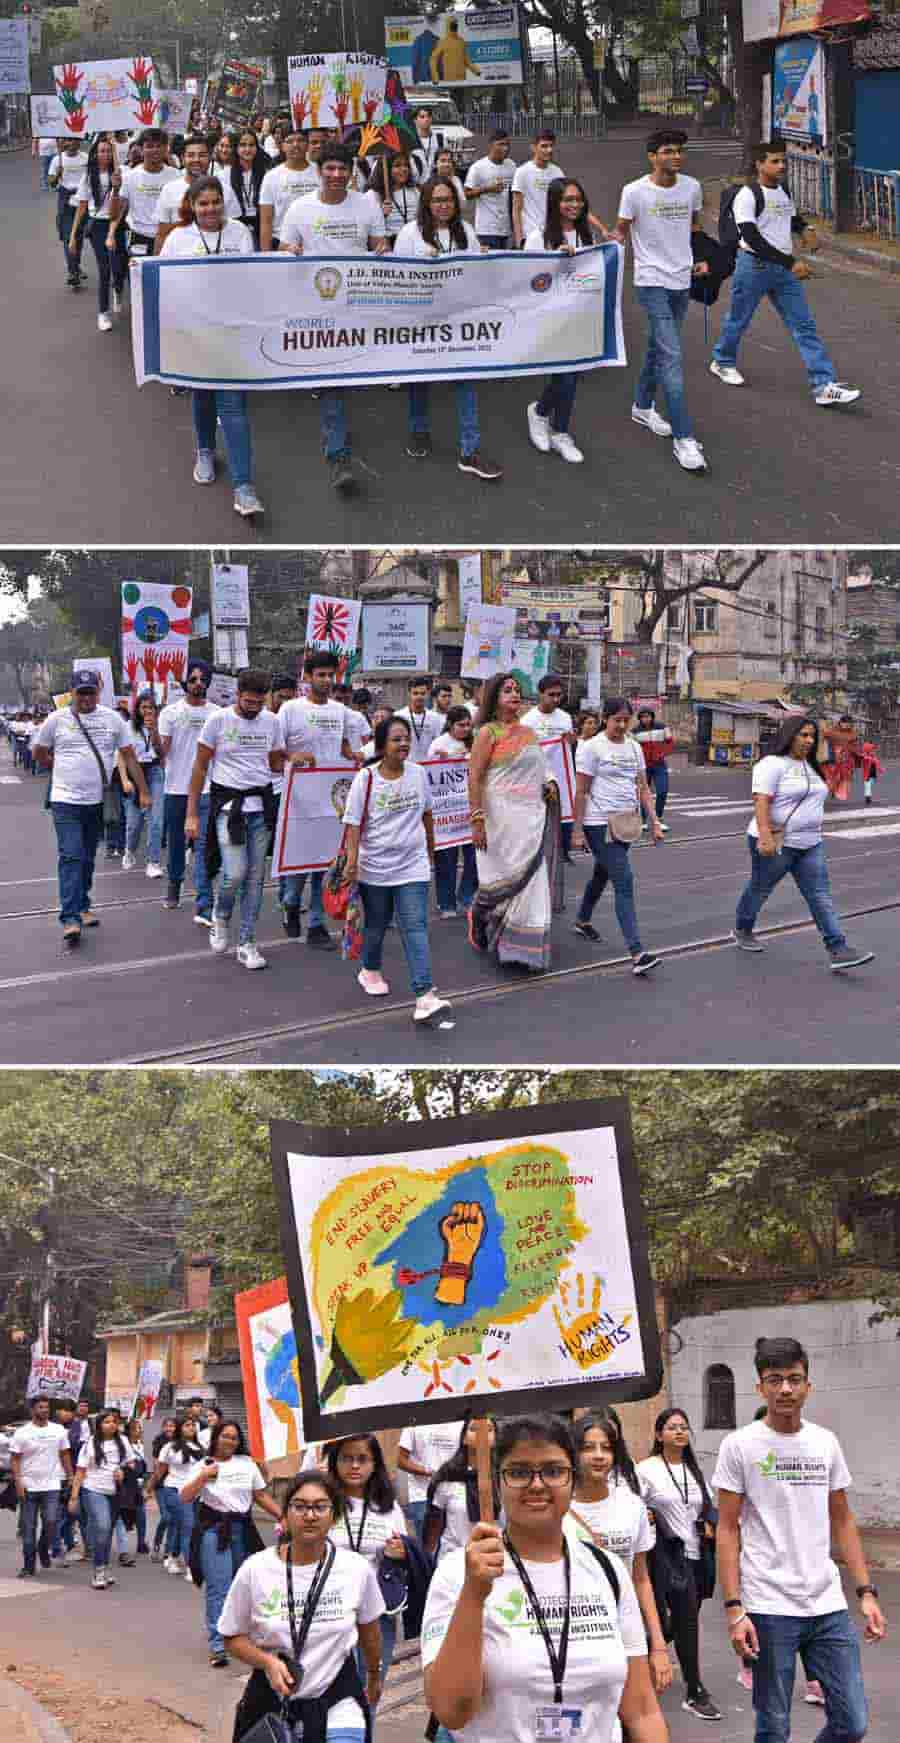 Students of the department of management, J D Birla Institute, organised a silent walk to mark the occasion of Human Rights Day celebrated globally on December 10. Dr Manabi Bandyopadhyay (2nd picture) flagged off the rally and walked with the students. A ‘nukkad natak’ was also performed by the participants of the silent walk